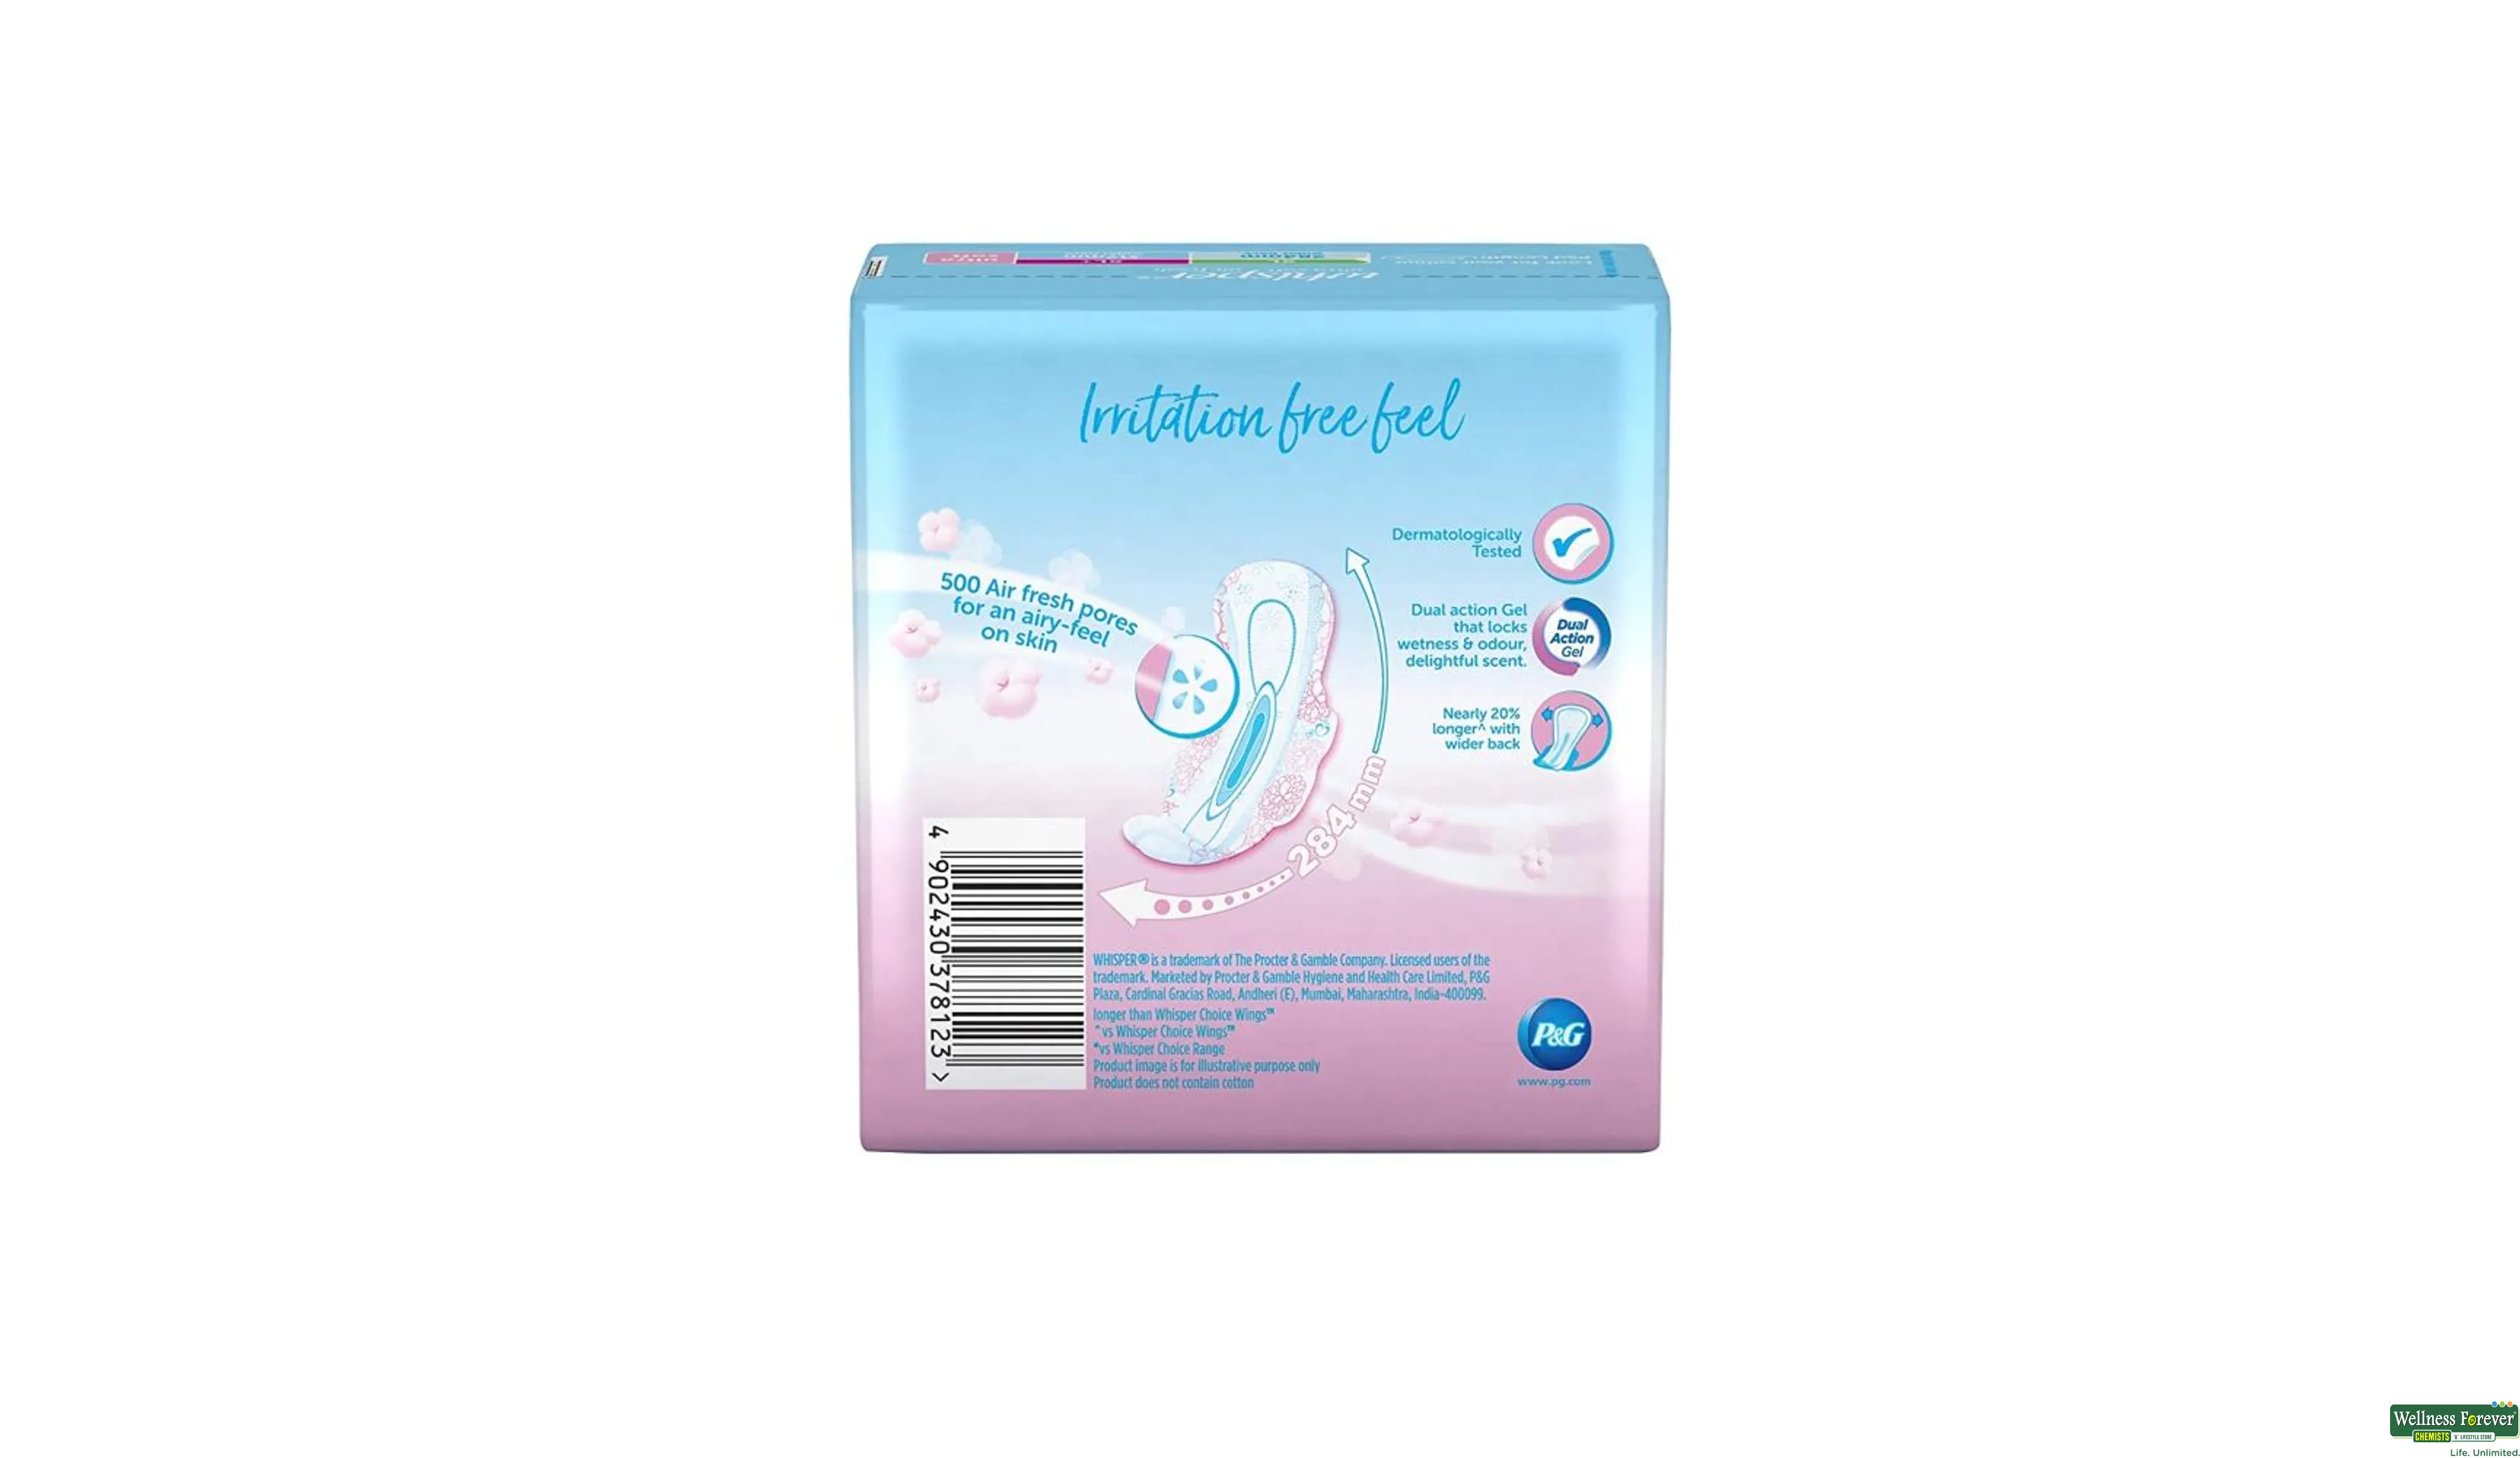 Whisper Ultra Soft Sanitary Pads xl+30+30 Sanitary Pad, Buy Women Hygiene  products online in India